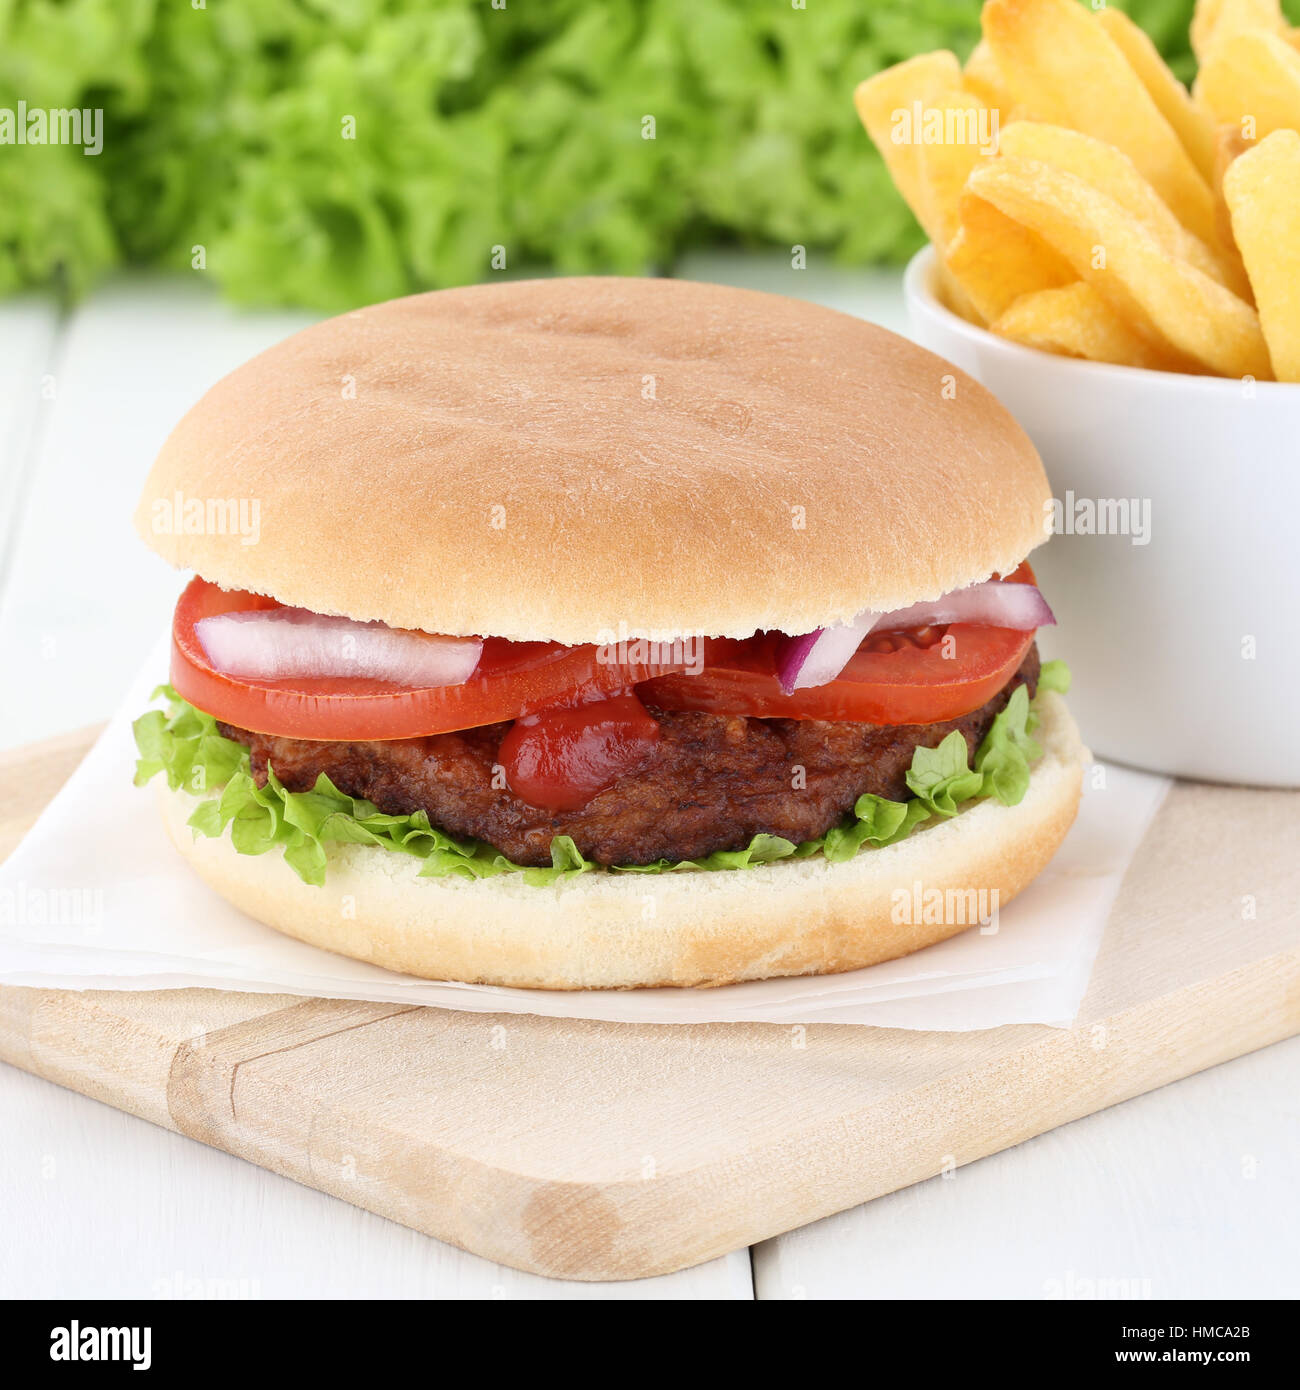 Hamburger and fries beef tomatoes lettuce unhealthy eating Stock Photo